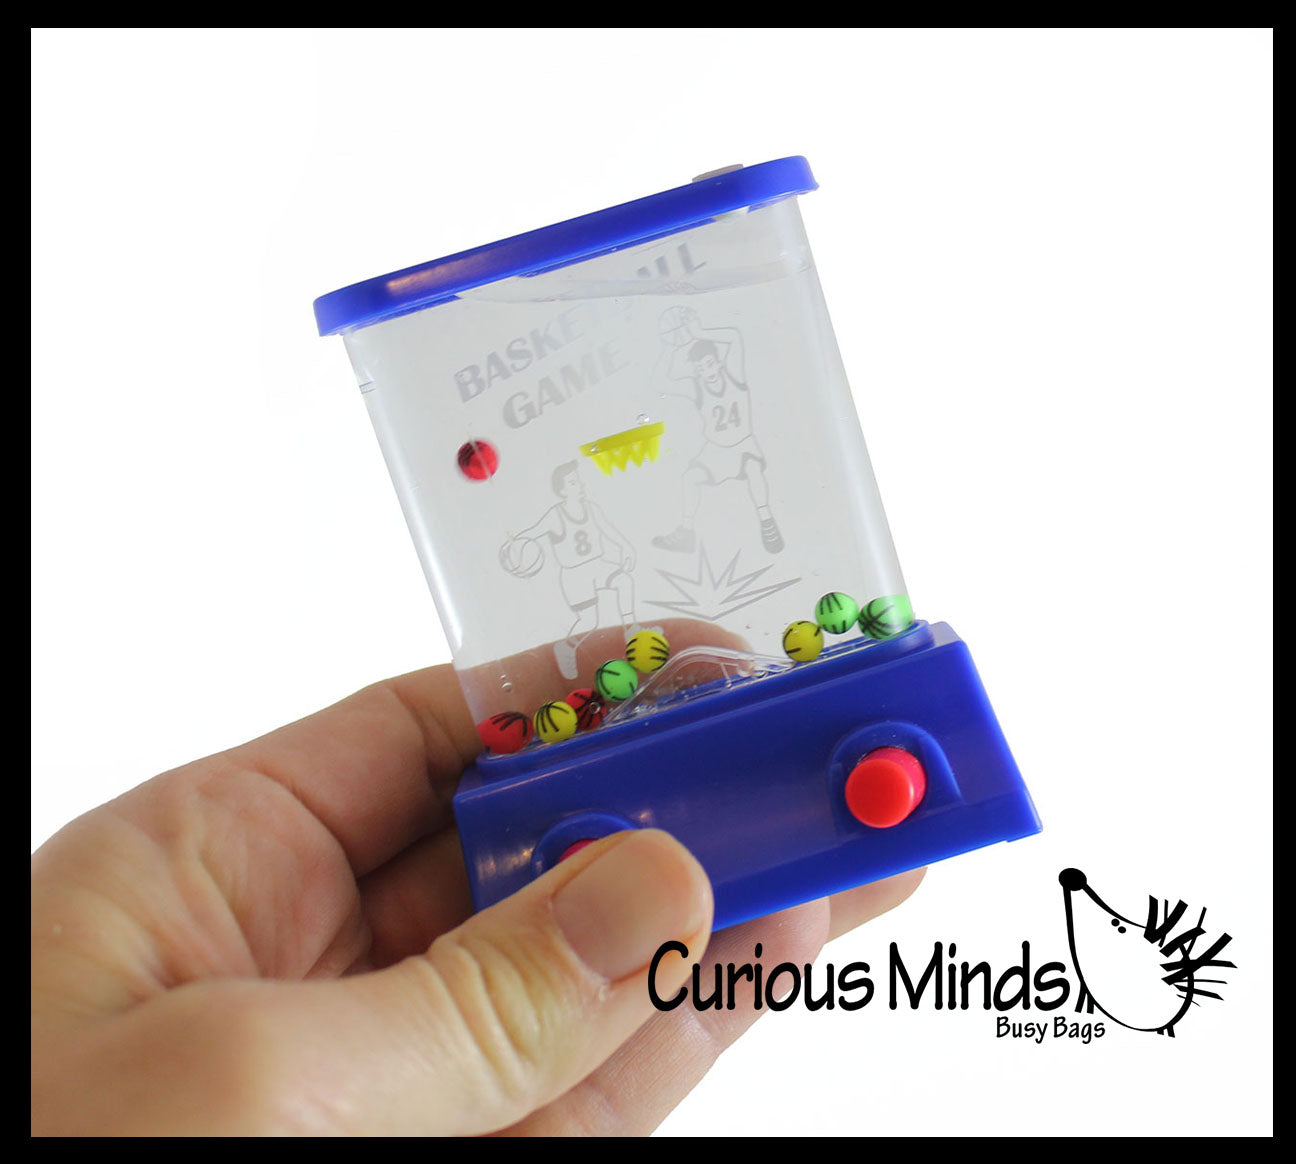 Curious Minds Busy 3 Small Water Games Basketball Hoop Challenge - Push Button to Shoot Hoops and Get Balls in The Net - Hand Held Travel Arcade Game